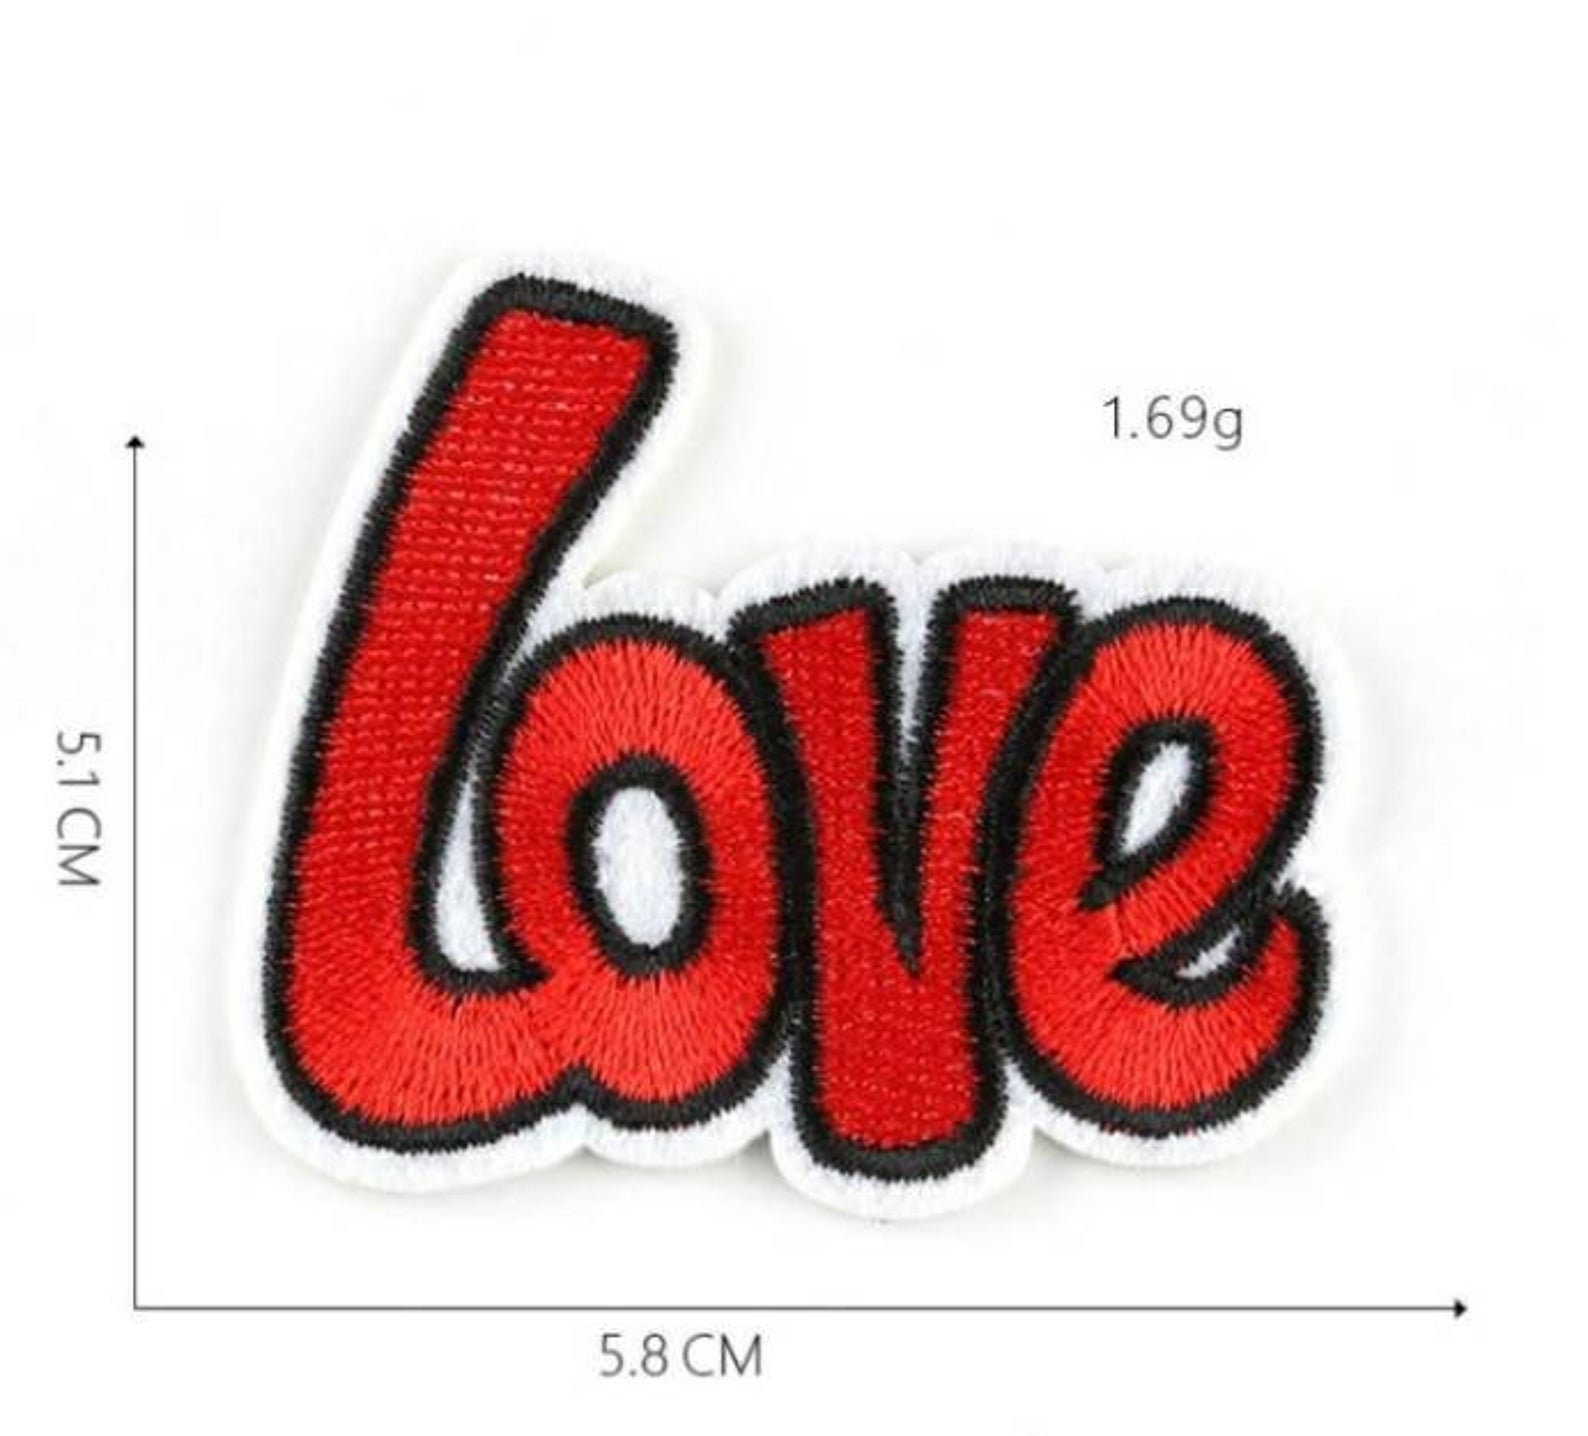 Iron on Colourful Velvet LOVE Embroidery Applique Patch Sew Iron Badge 